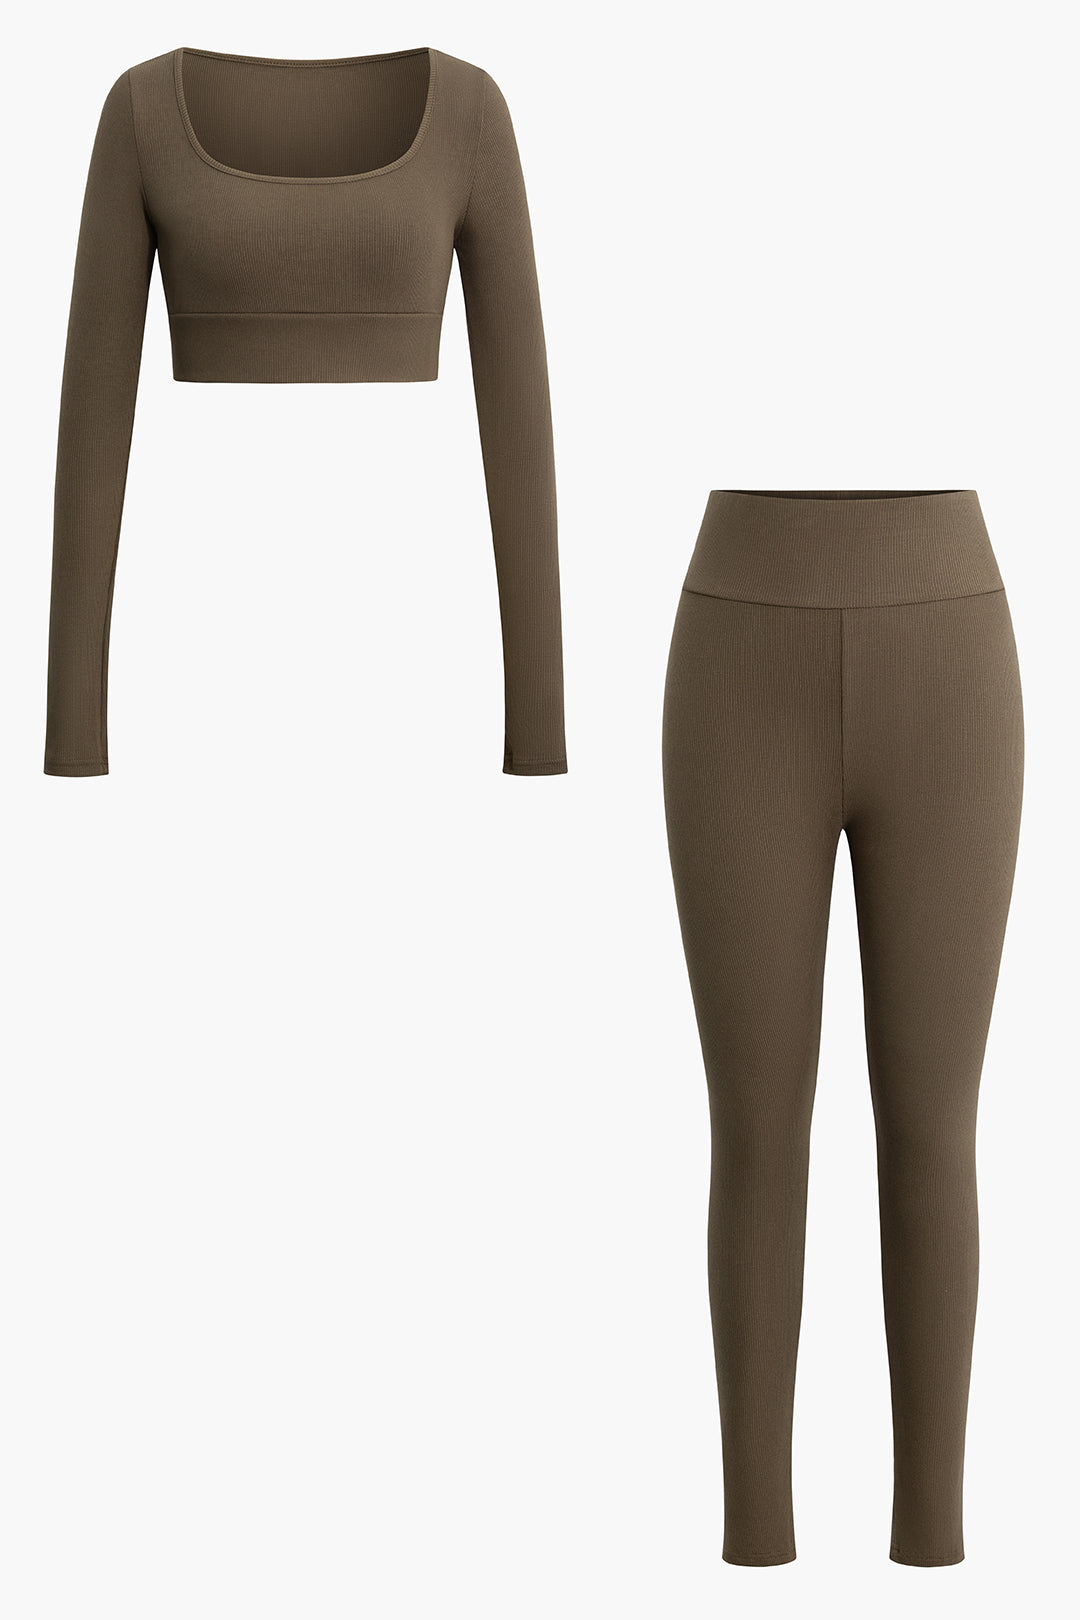 Square Neck Long Sleeve Crop Top And Rib Knit Leggings Set